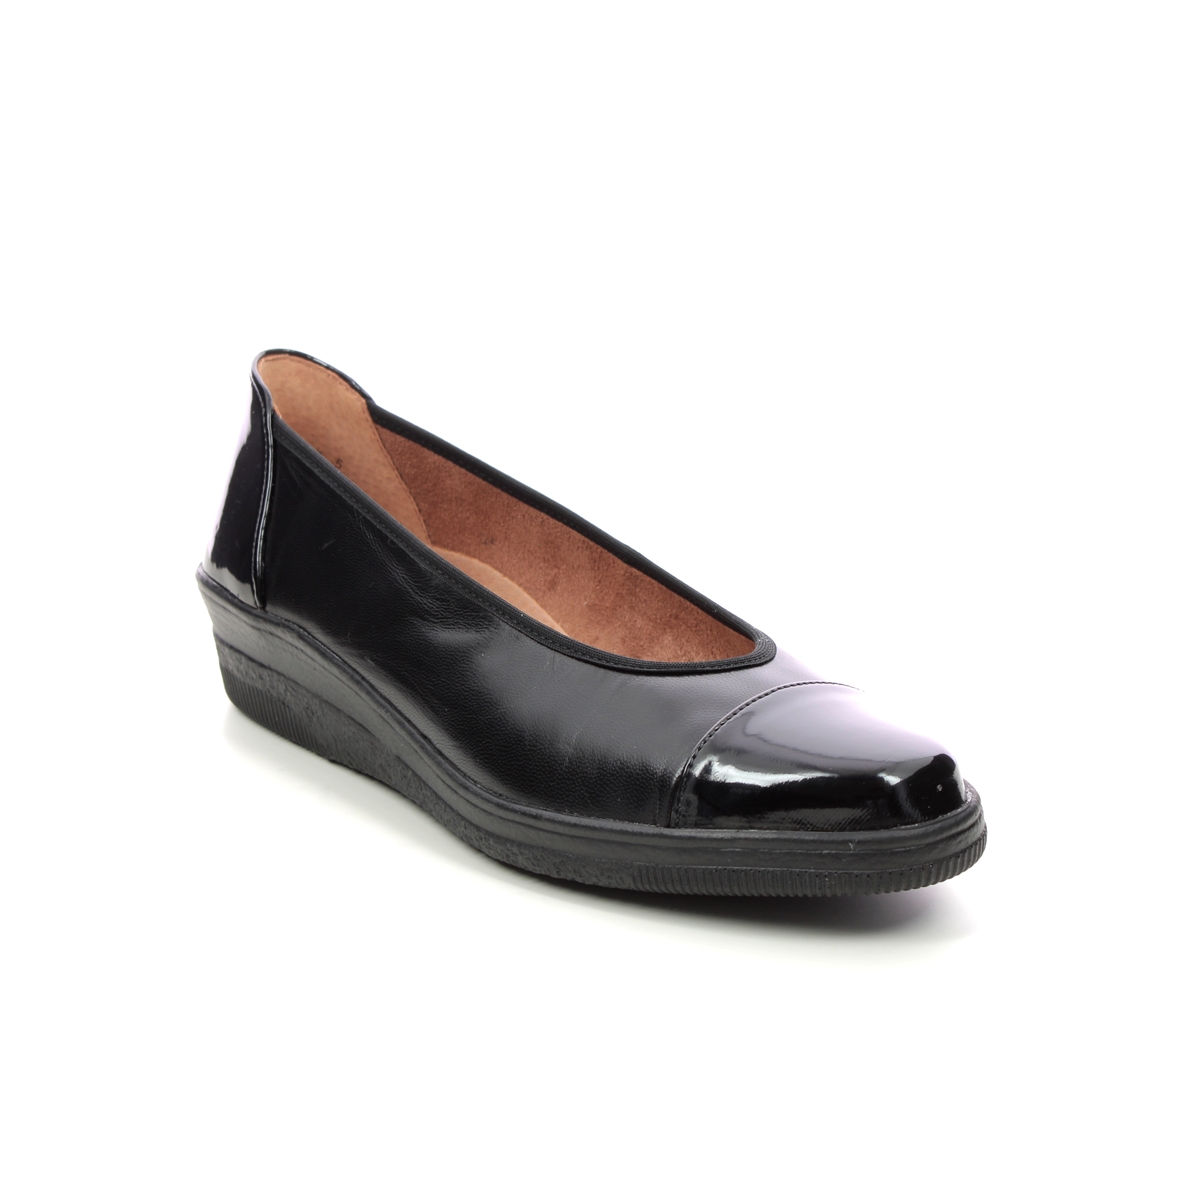 Gabor Petunia Black Patent Leather Womens Comfort Slip On Shoes 06.402.37 In Size 8 In Plain Black Patent Leather  Womens Comfort Slip On Shoes In Sof